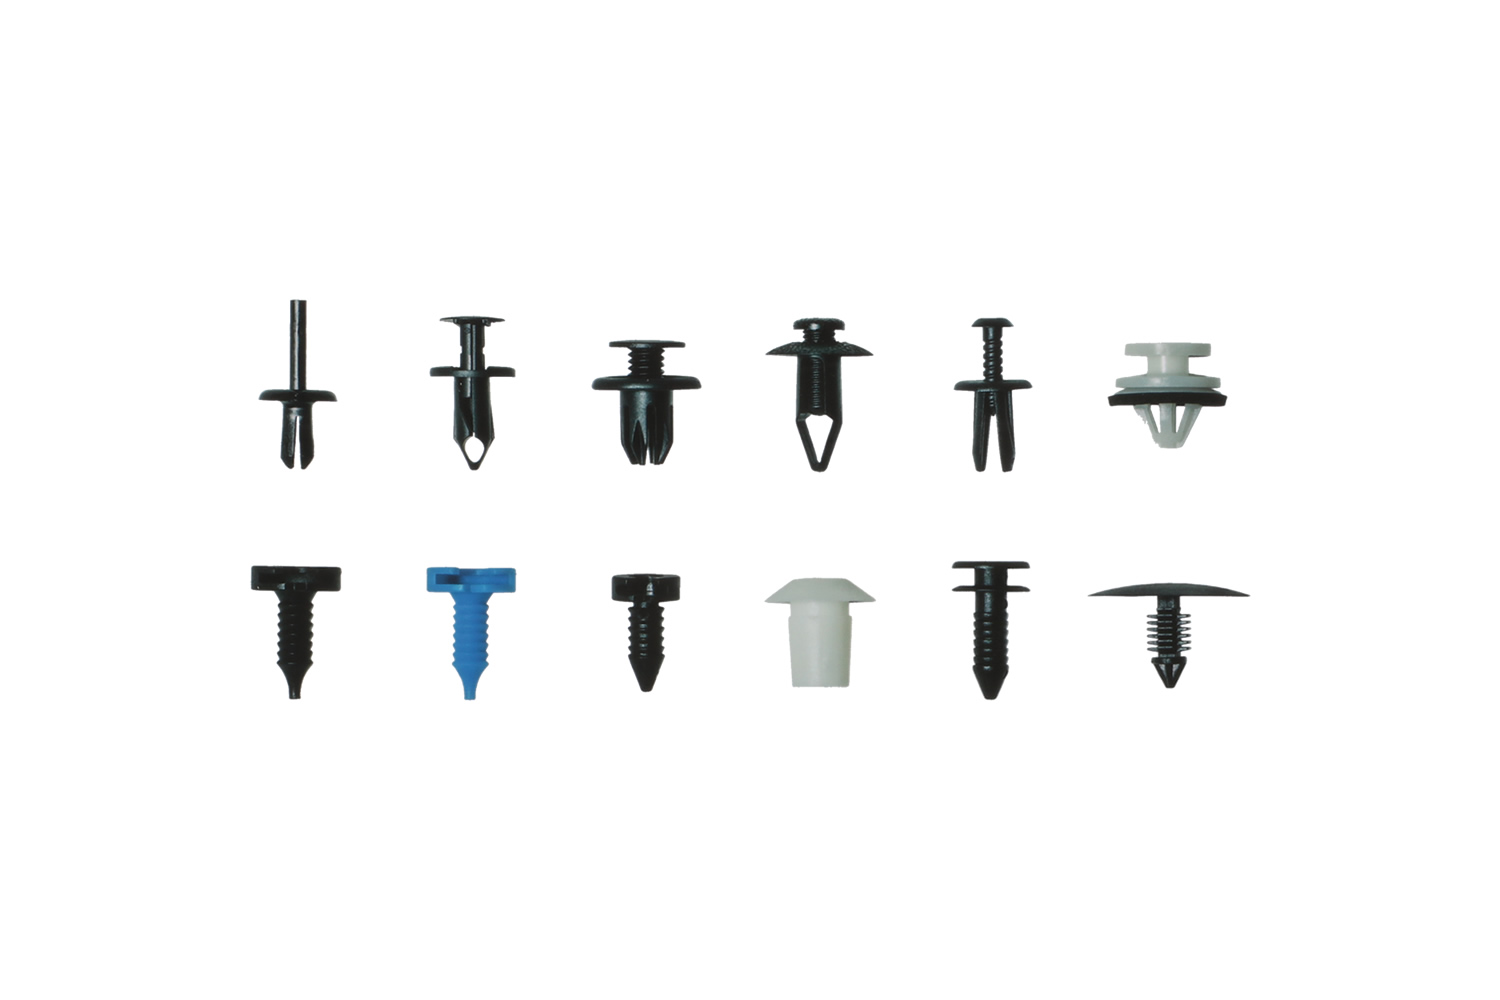 ▷ Land Rover Clips and plastic rivets - available here